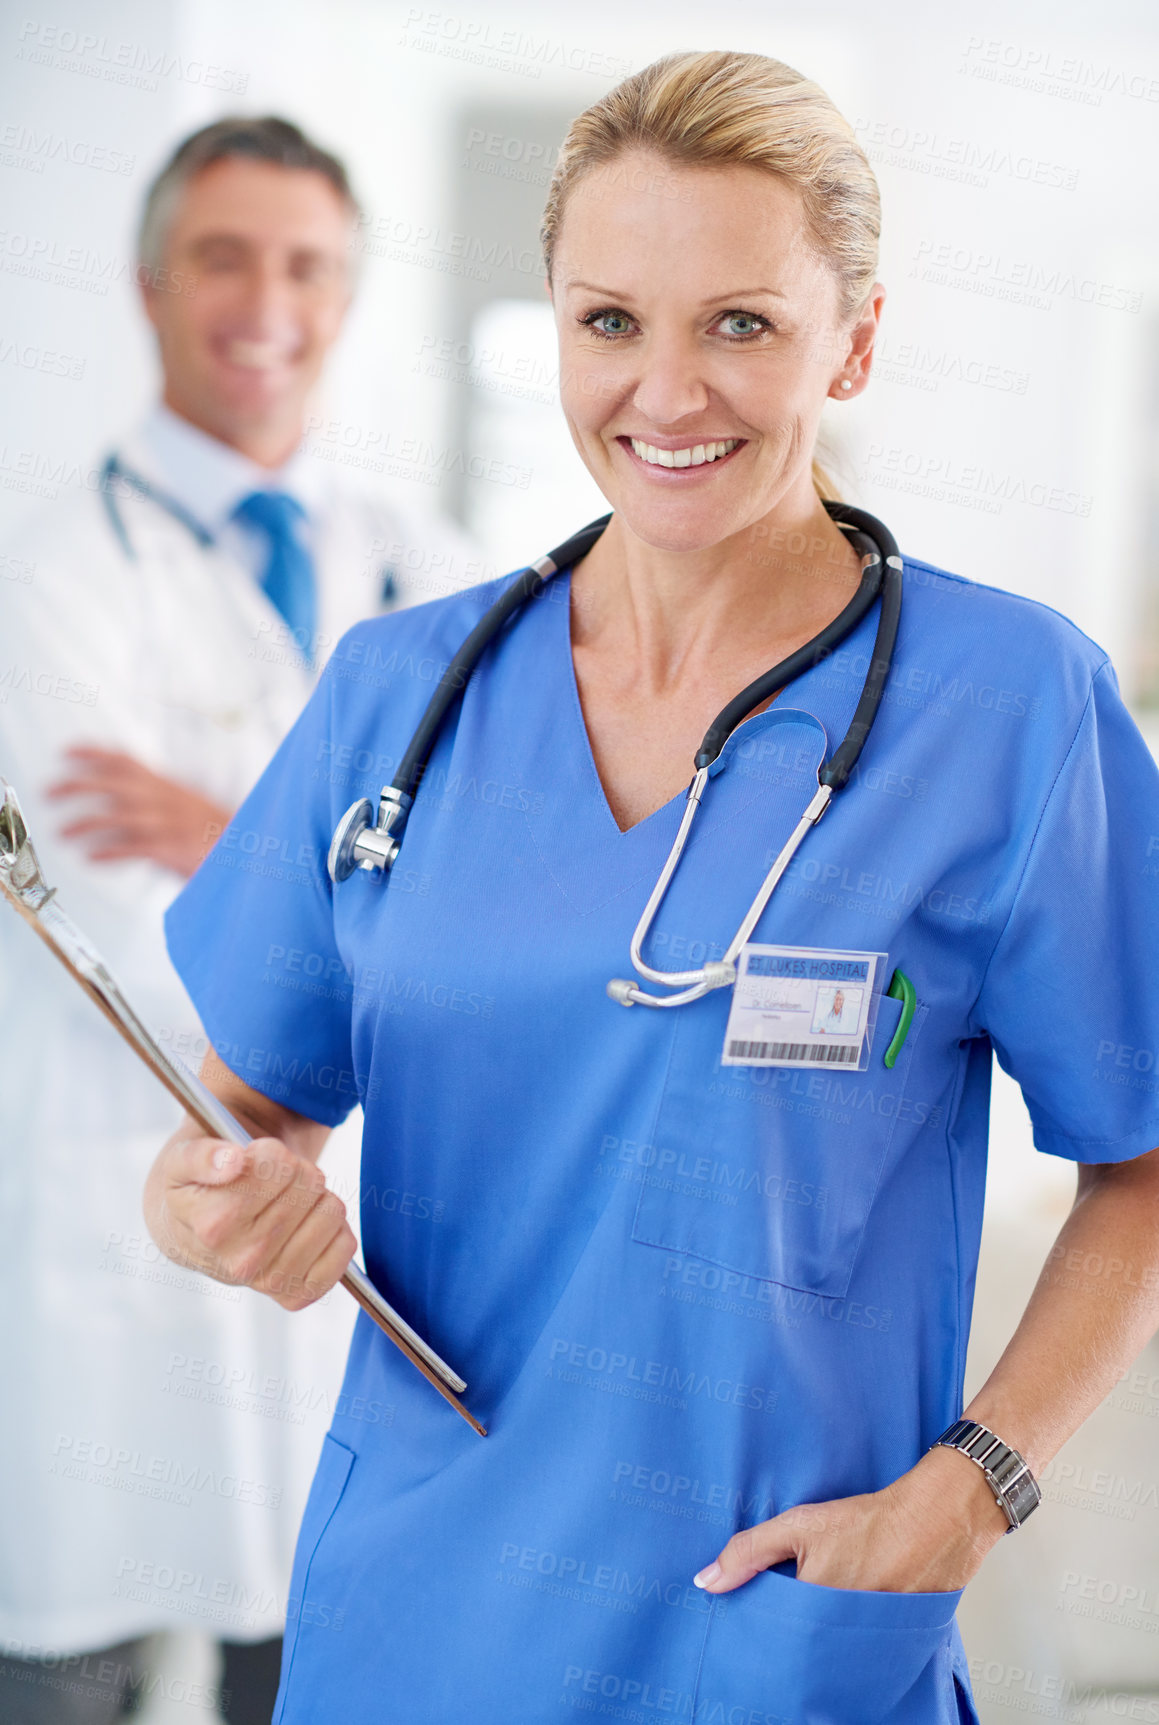 Buy stock photo Portrait of a female doctor in scrubs with a colleague standing in a the background